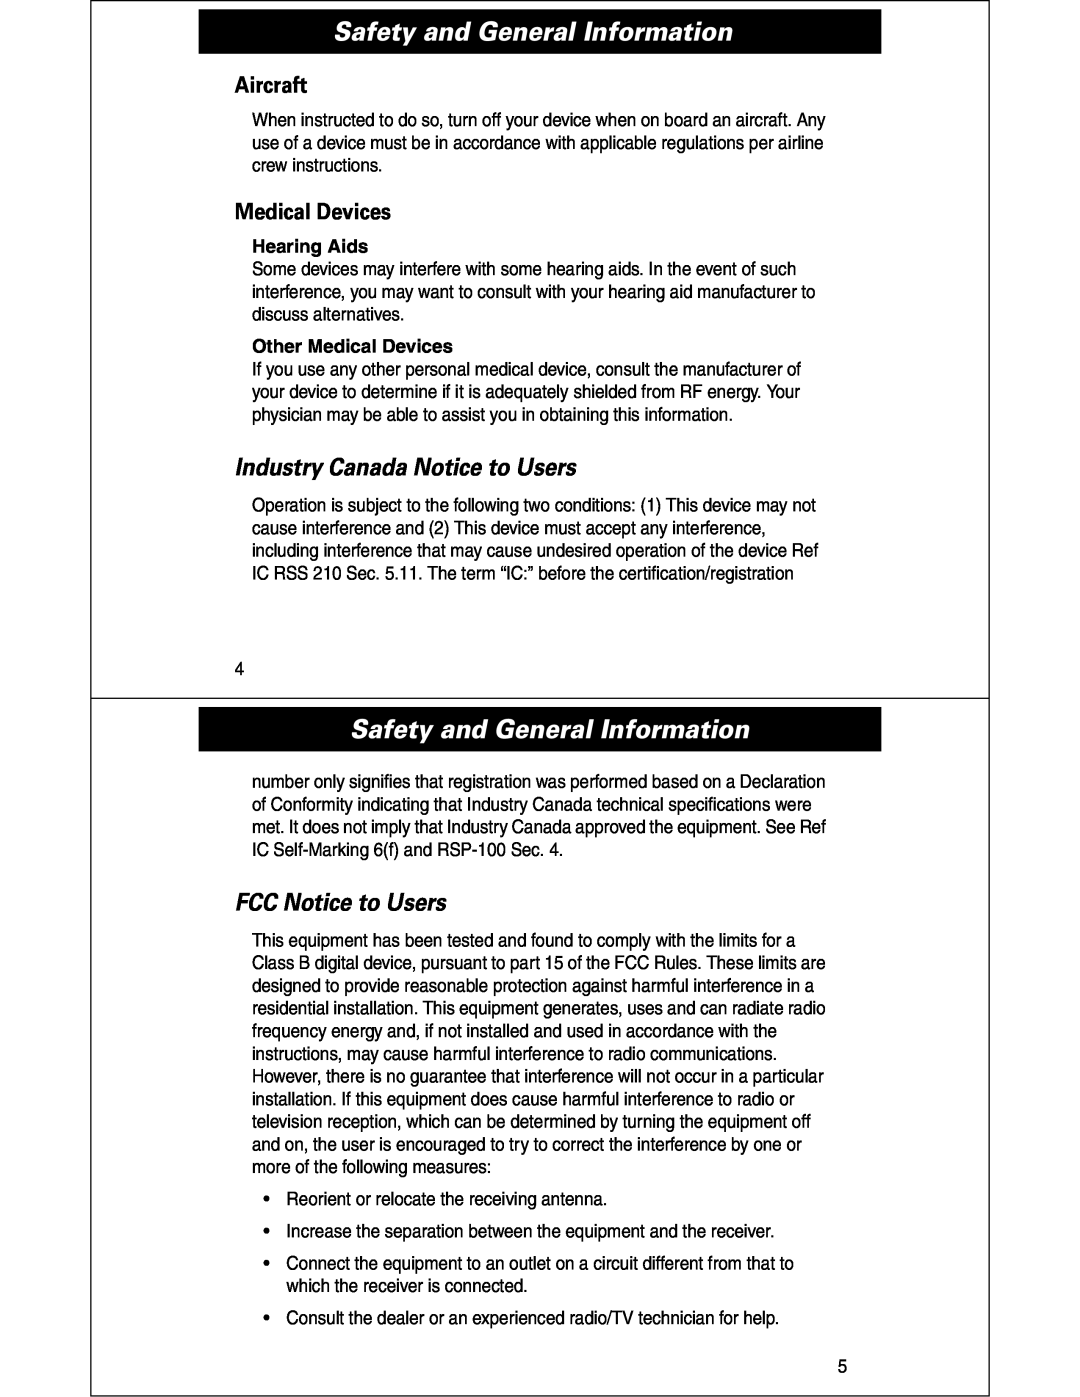 Motorola HS810 manual Safety and General Information, Industry Canada Notice to Users, FCC Notice to Users, Aircraft 